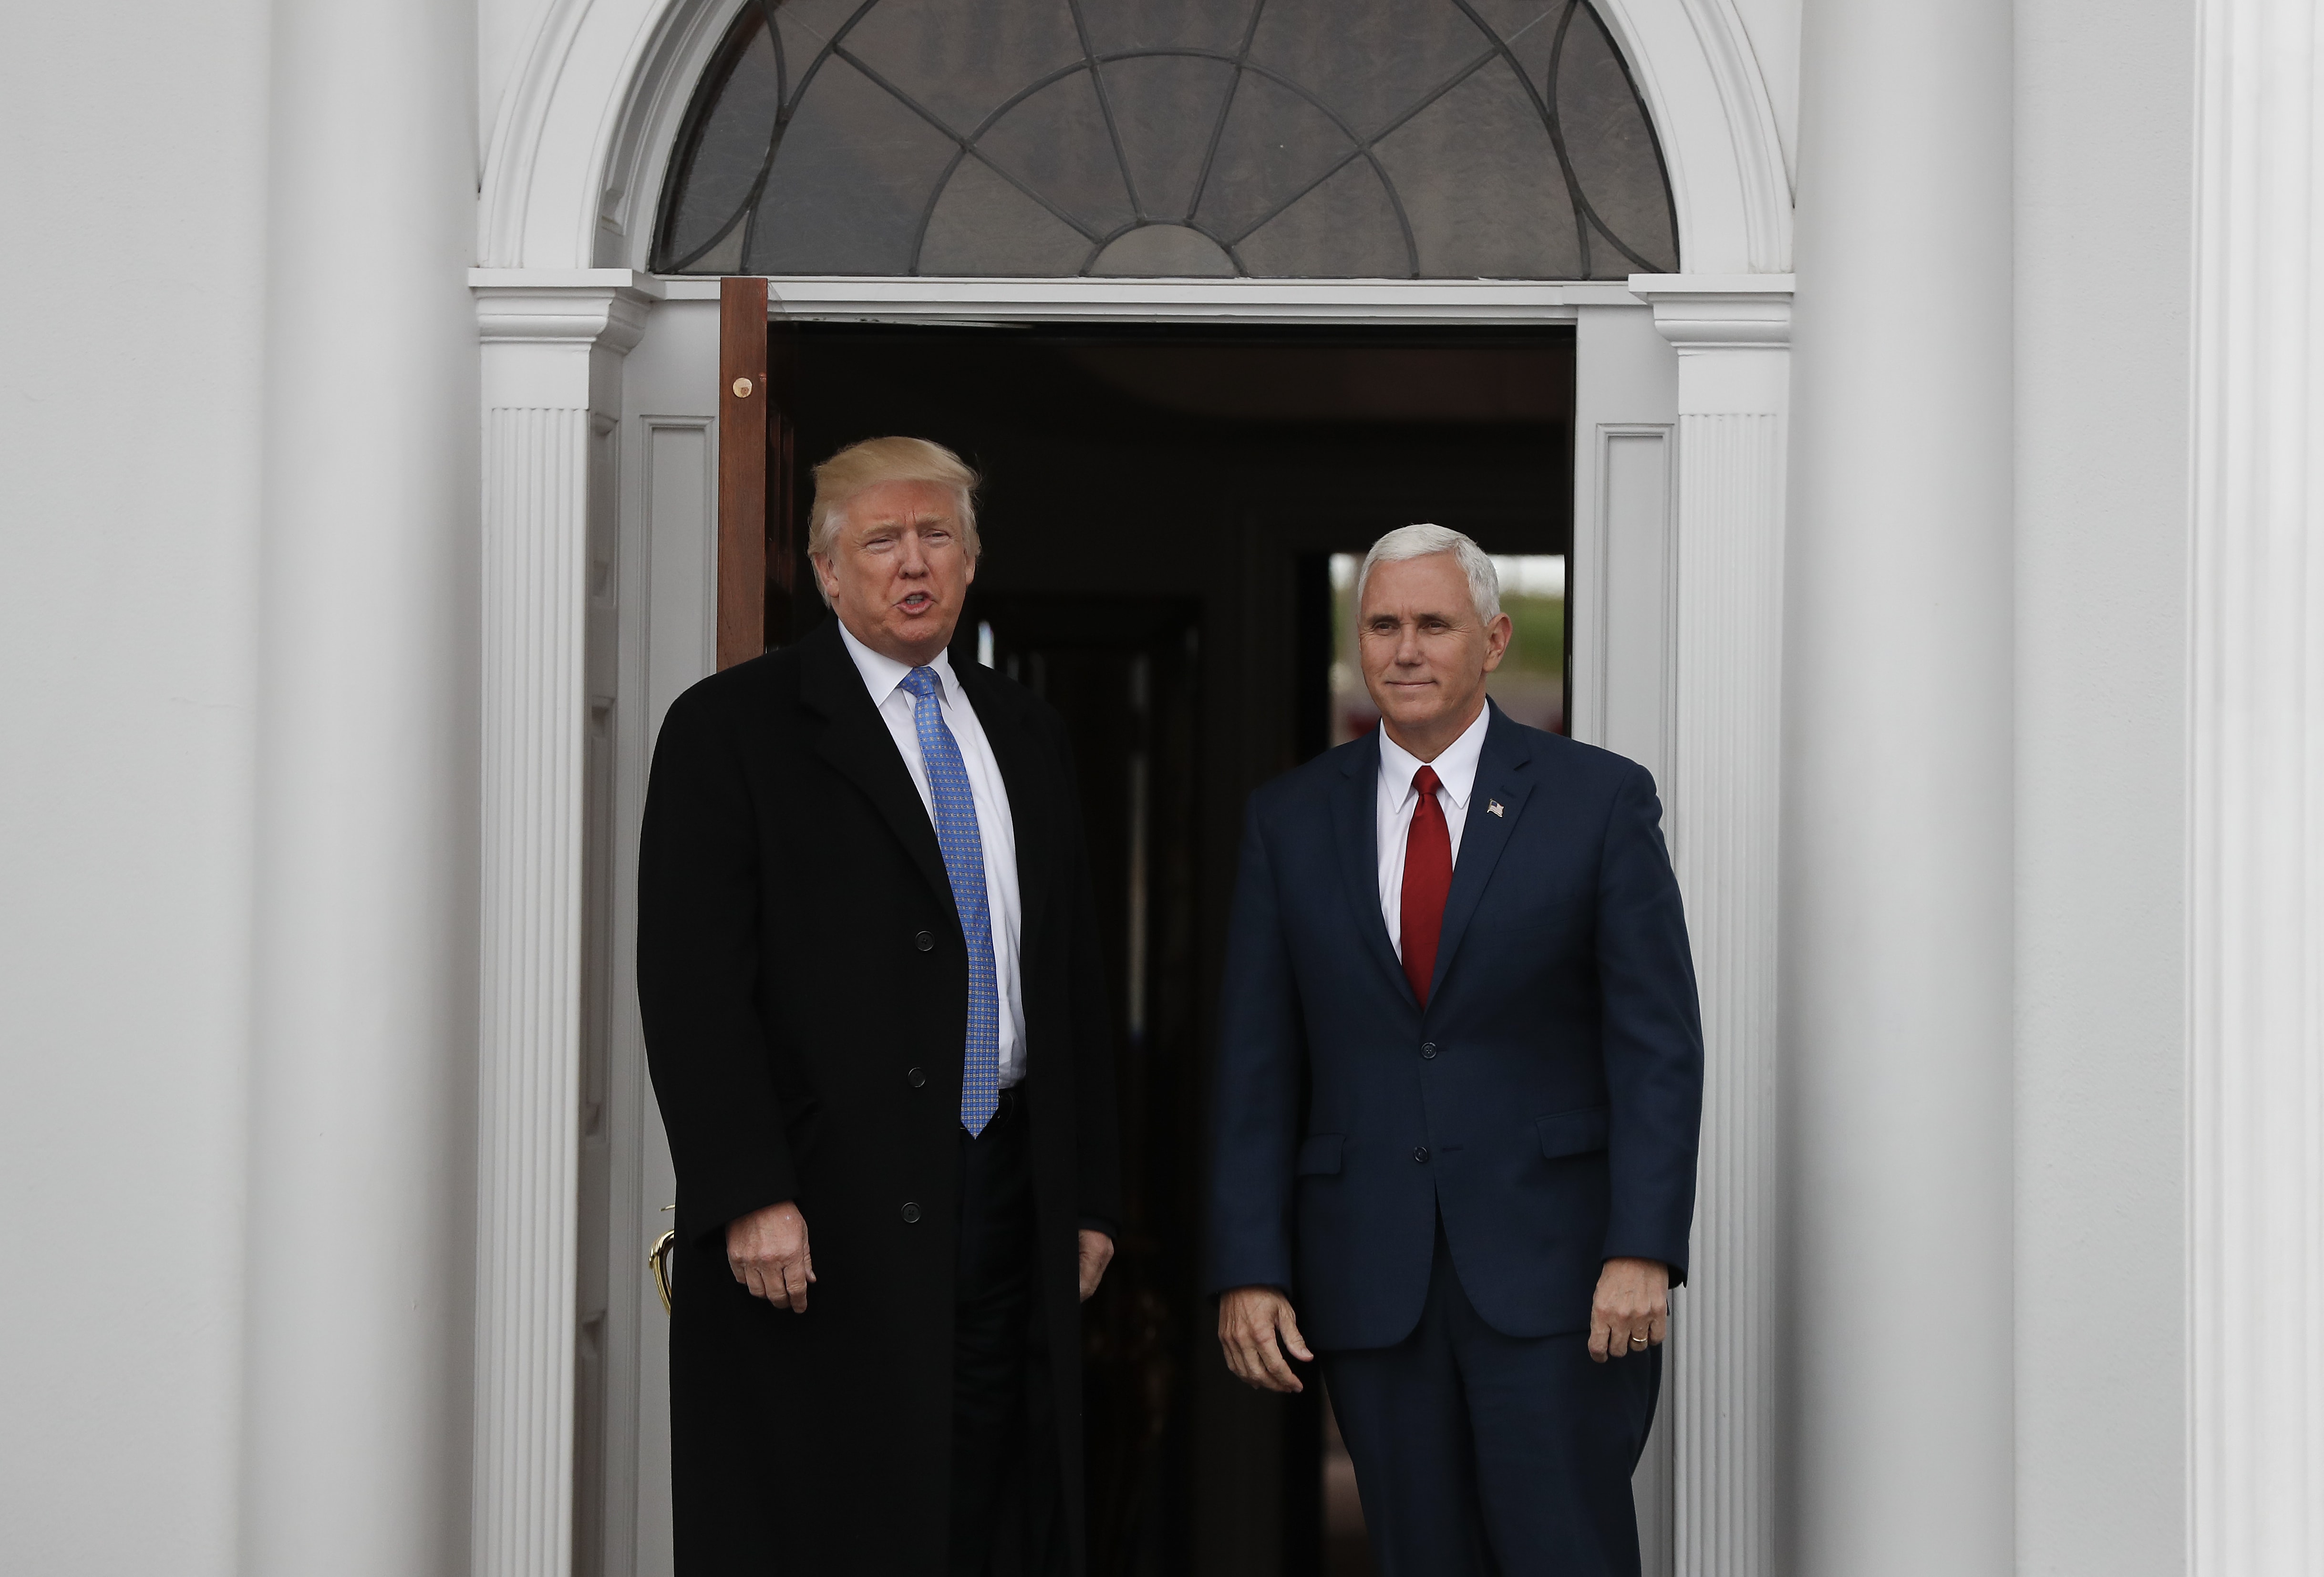 President-elect Donald Trump and Vice President-elect Mike Pence stand together in the entryway of Trump National Golf Club Bedminster clubhouse, AP Photo/Carolyn Kaster